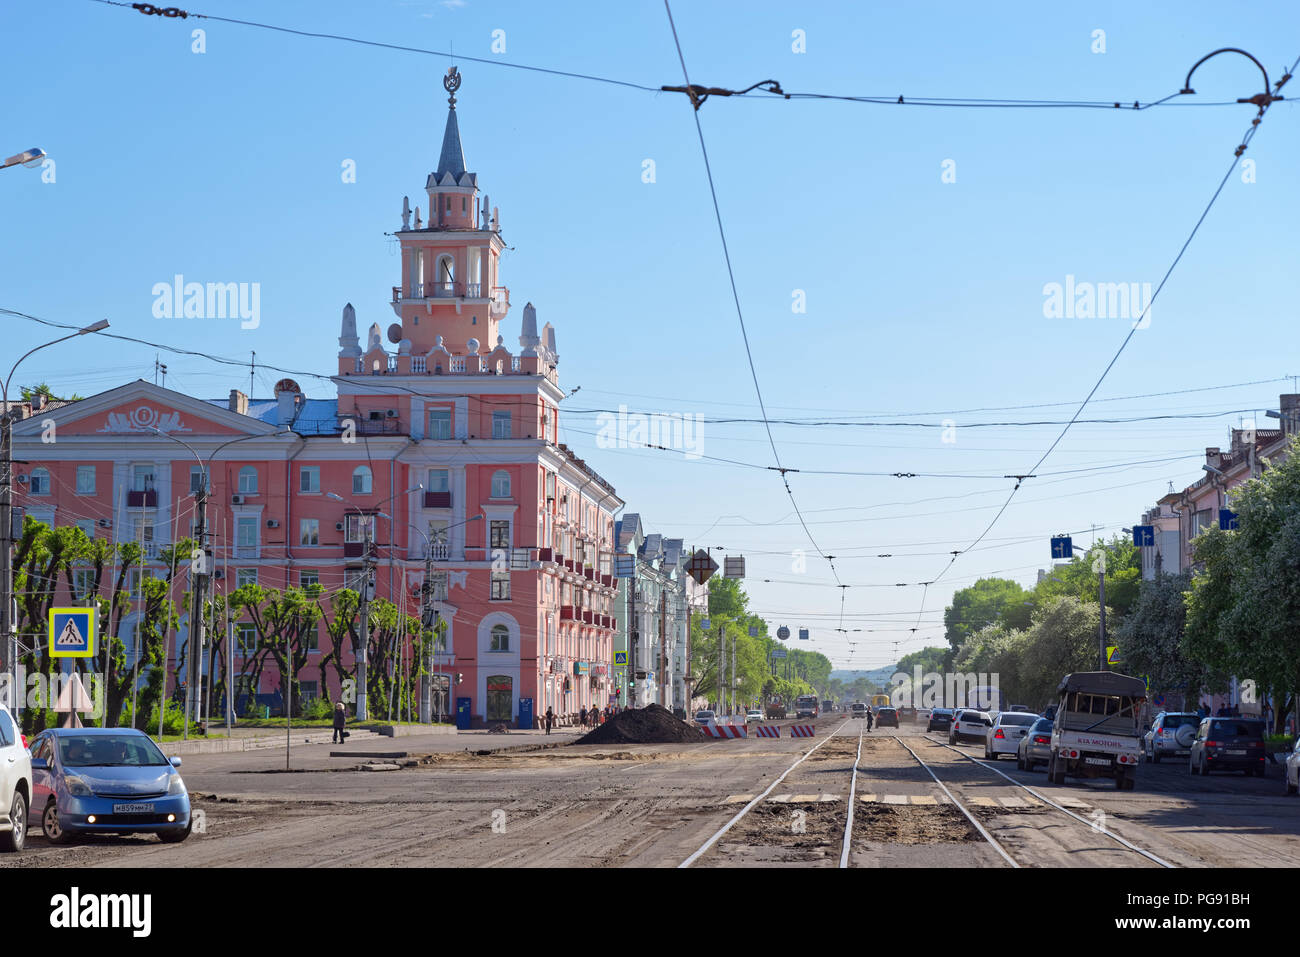 Komsomolsk-on-Amur, Russia - May 26, 2018: View on the pink house with a spire (unofficial city symbol) from the street called 'Prospekt Lenina'. Stock Photo